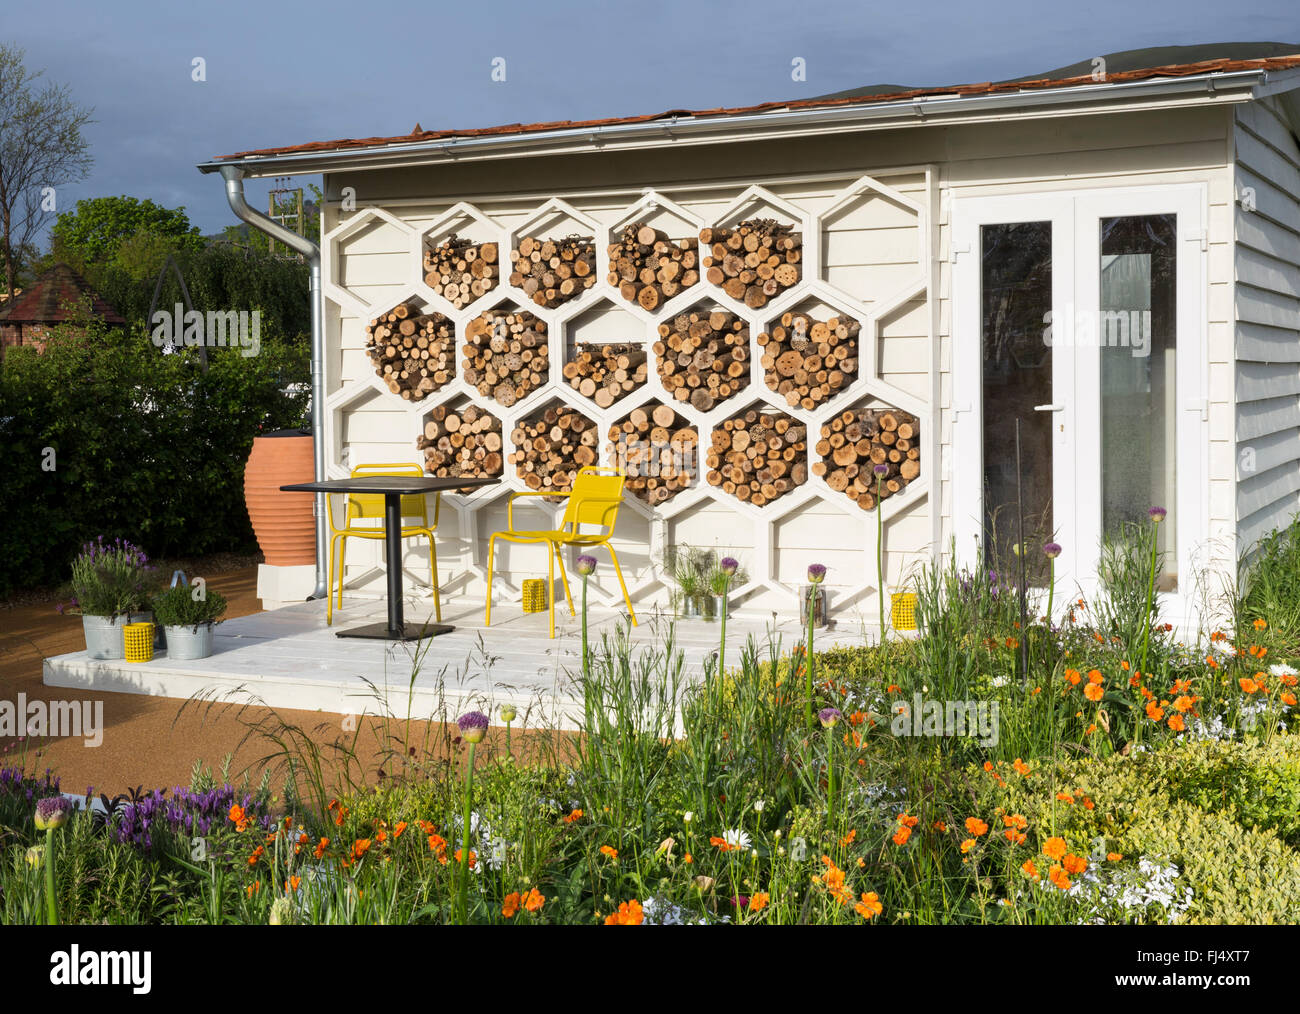 Garden office summerhouse office hexagonal structures insect bug hotel motel habitat wooden deck with table chairs, bee planting, flower borders UK Stock Photo